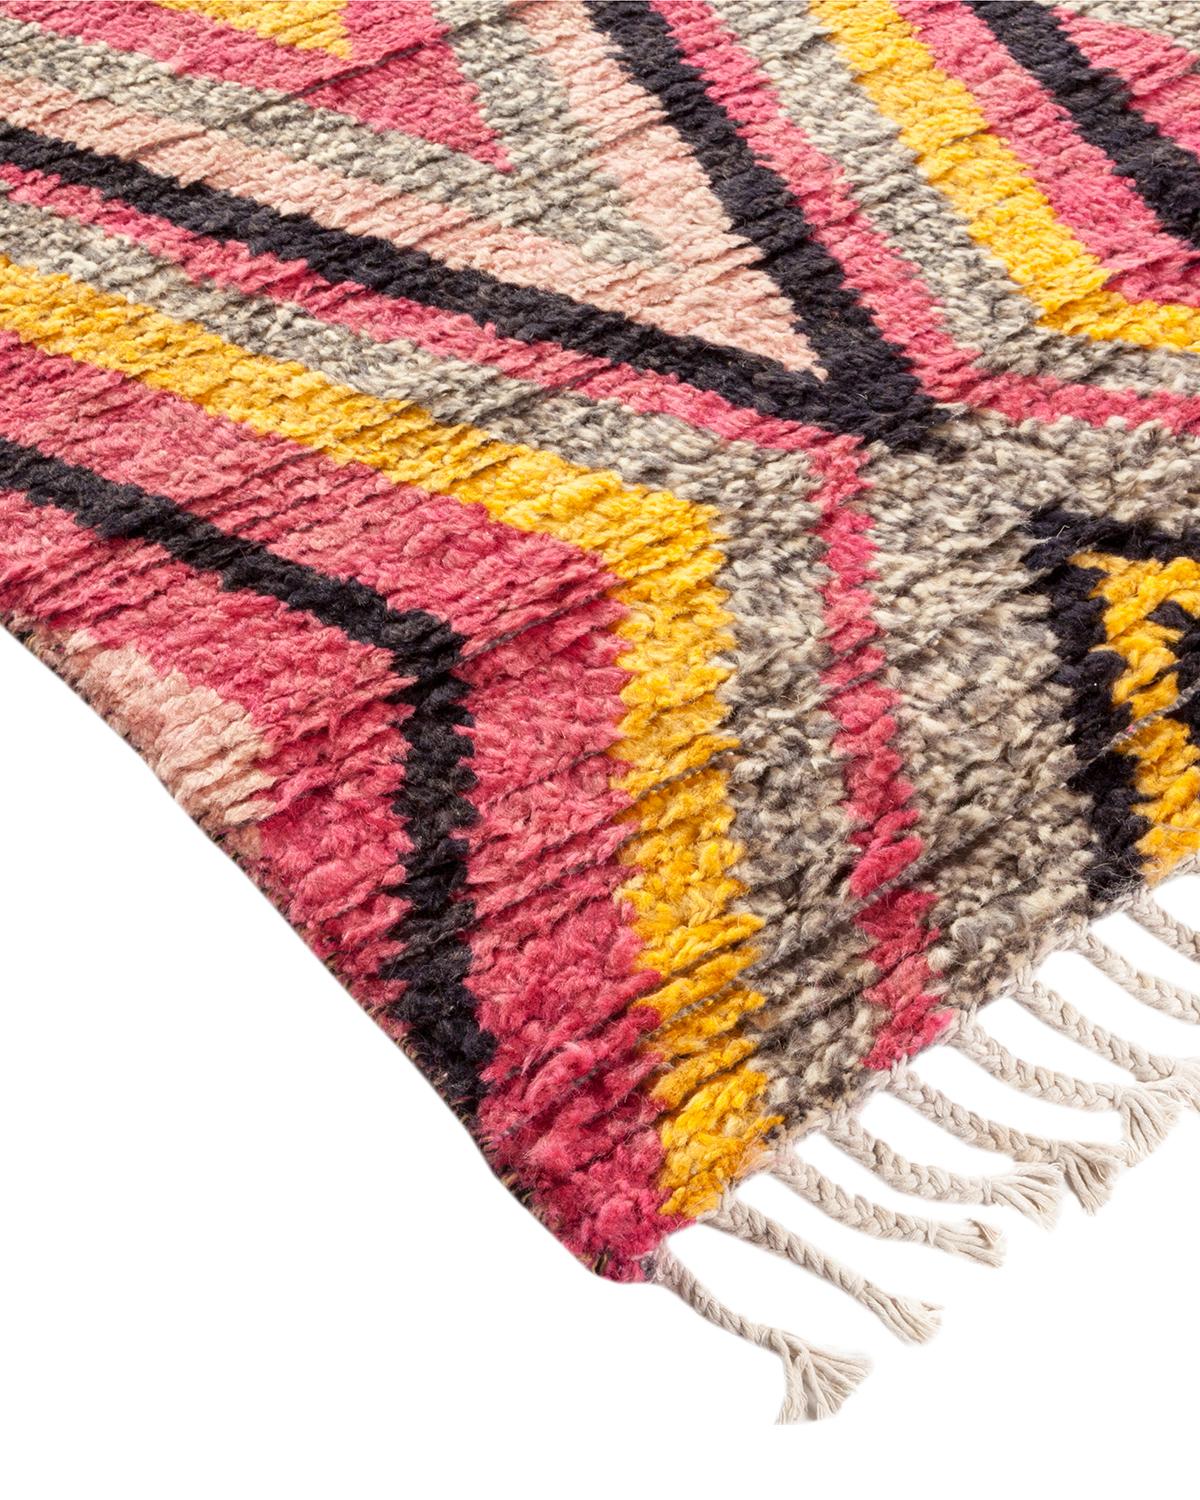 Inspired by the weavings of the Beni Ourain nomadic tribe in Morocco's snowy Atlas Mountains, our Moroccan collection maintains the tradition of plush, shaggy piles while infusing contemporary Bohemian flair with modern patterns and colorways.